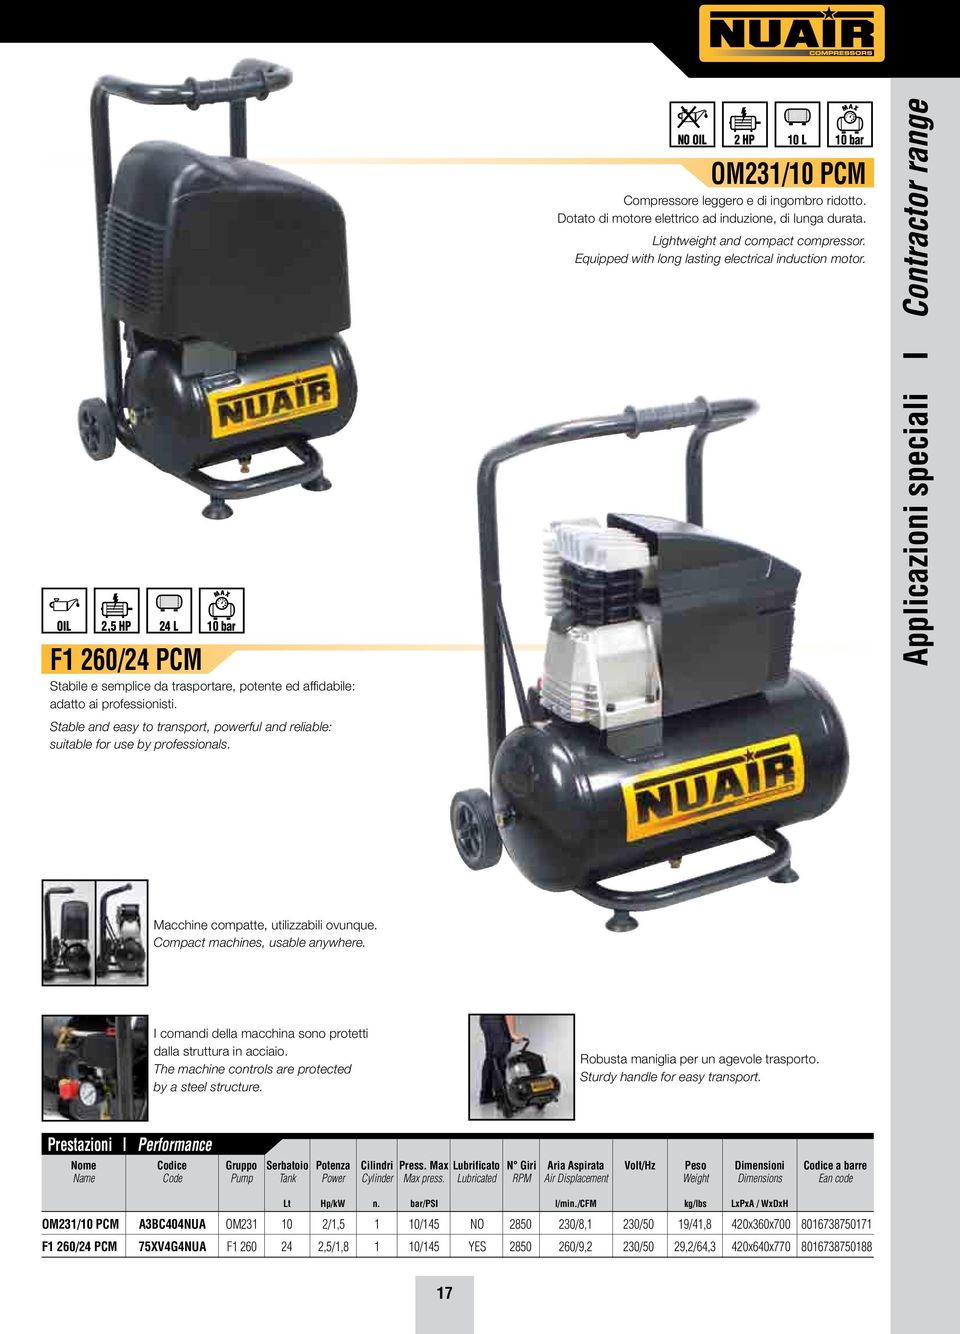 Dotato di motore elettrico ad induzione, di lunga durata. Lightweight and compact compressor. Equipped with long lasting electrical induction motor.